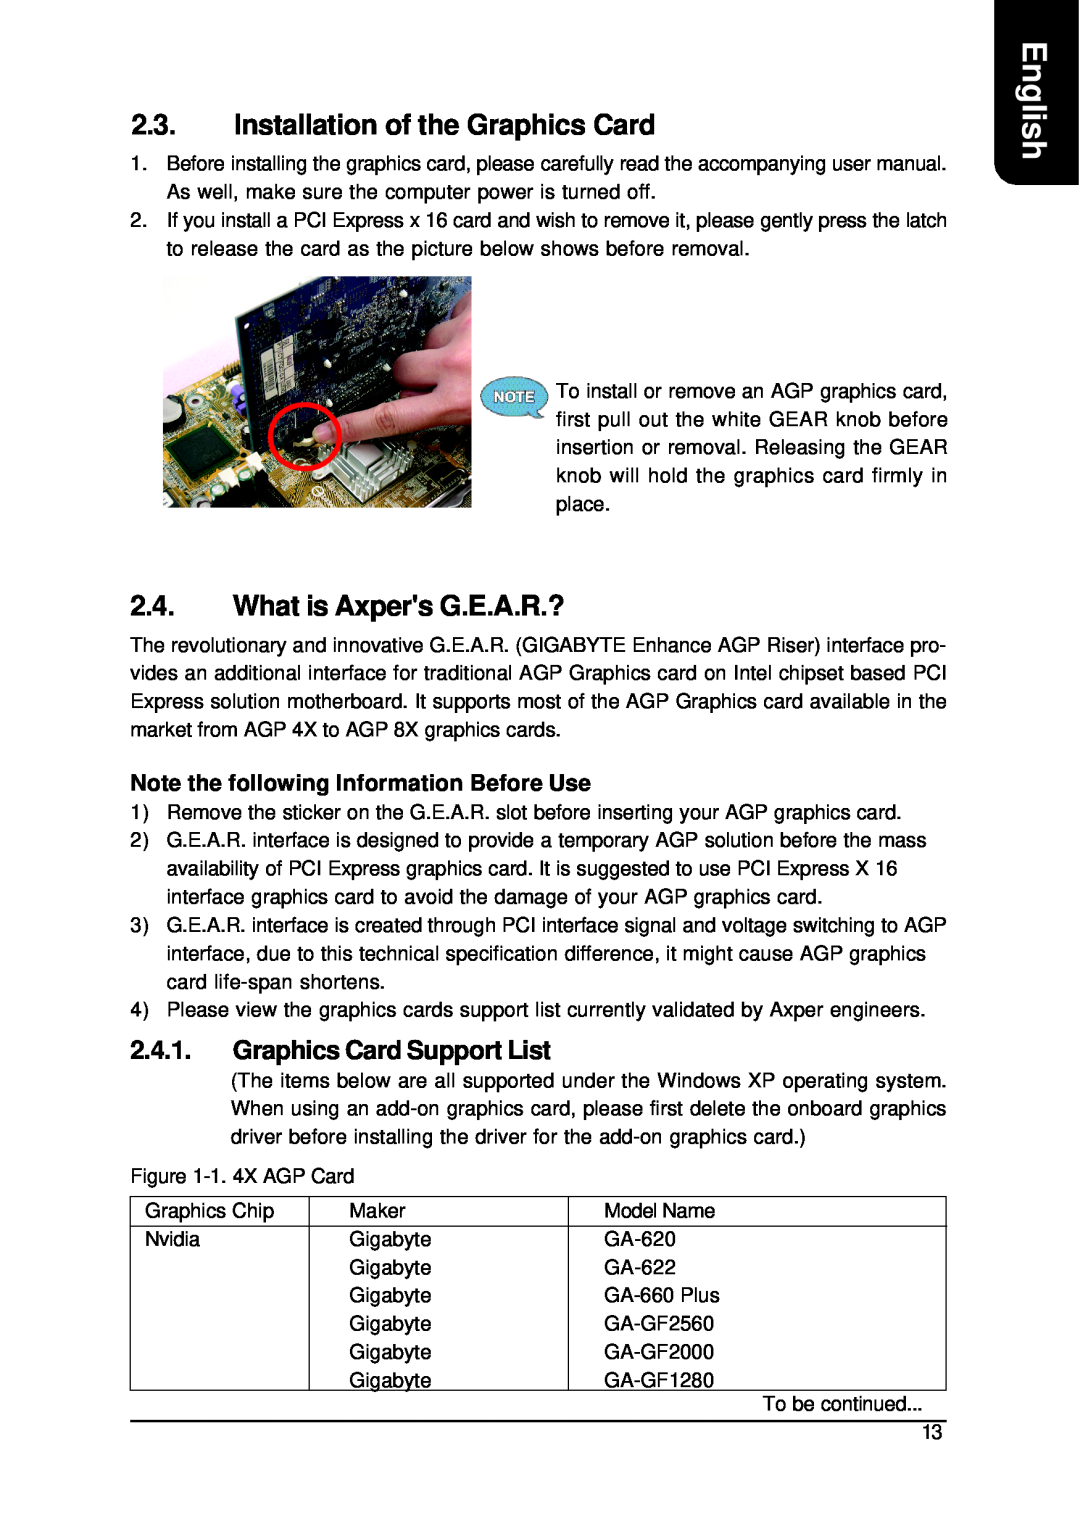 Intel XP-P5CM-GL Installation of the Graphics Card, What is Axpers G.E.A.R.?, Graphics Card Support List, English 